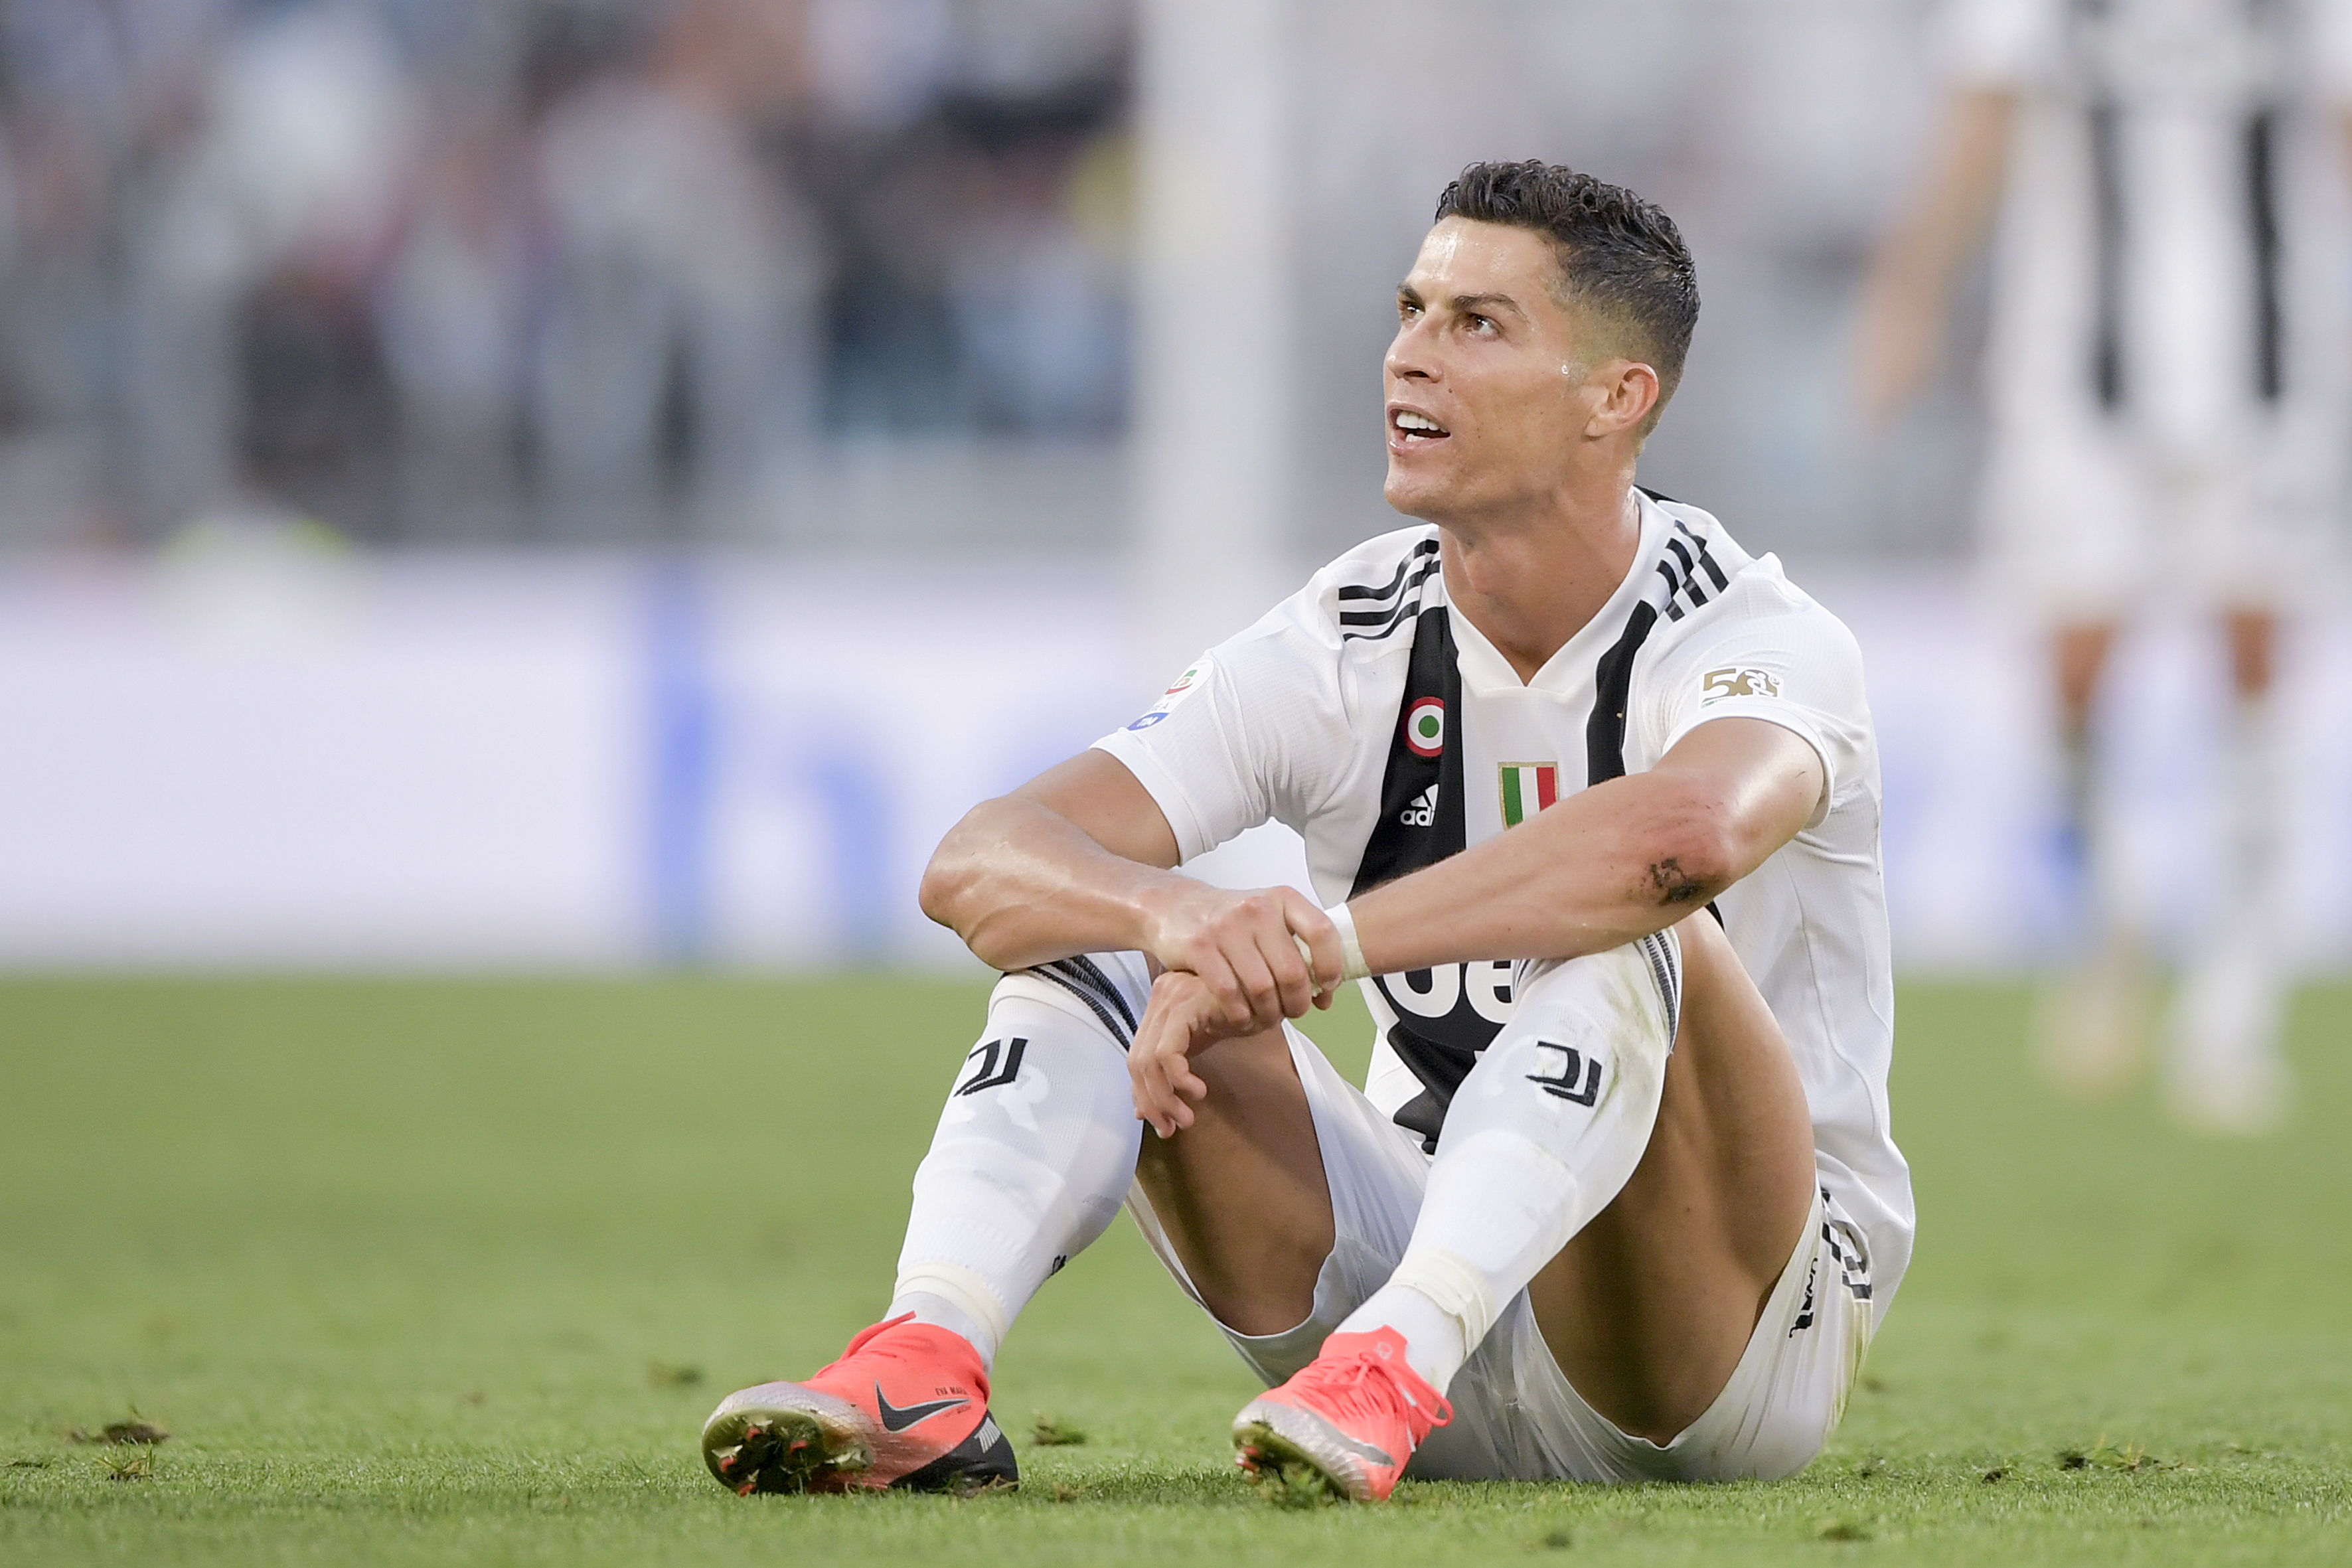 Juventus player Cristiano Ronaldo during the Serie A match between Juventus and SSC Napoli at Allianz Stadium on September 29, 2018 in Turin, Italy. (Daniele Badolato - Juventus FC—Juventus FC via Getty Images)